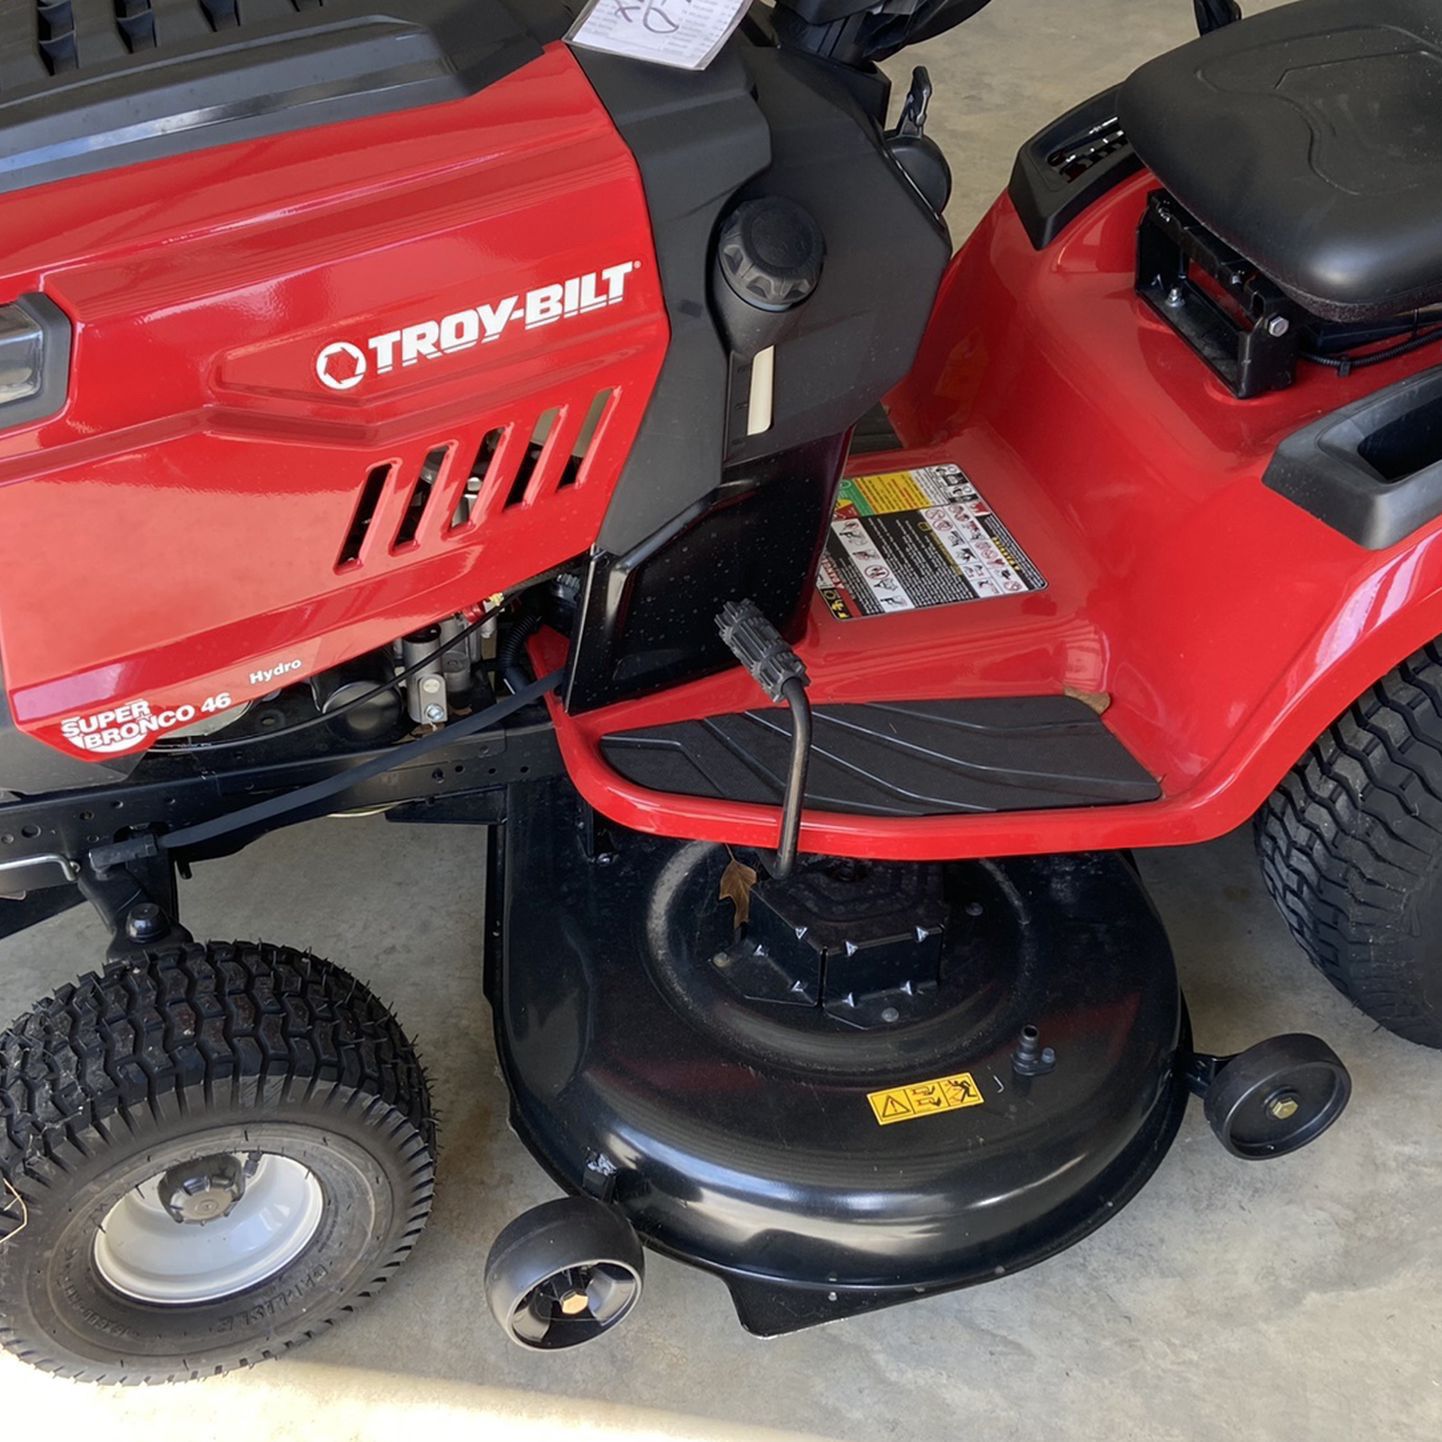 Brand New Troy Built 46 Inch Cut Super Bronco Riding Lawnmower